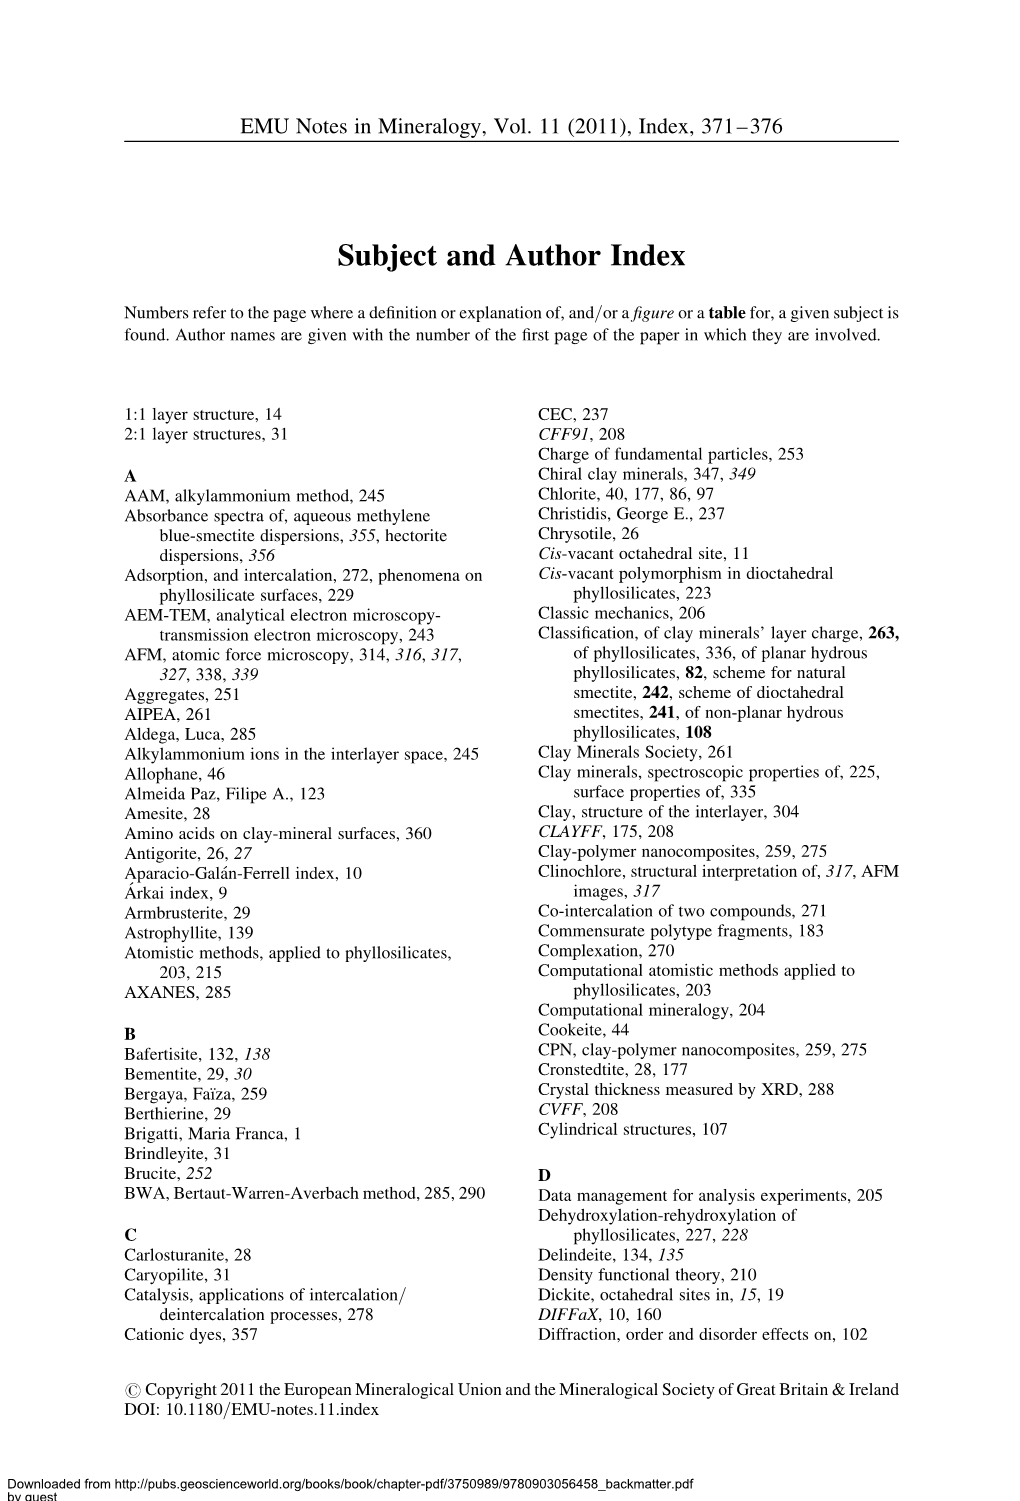 Subject and Author Index